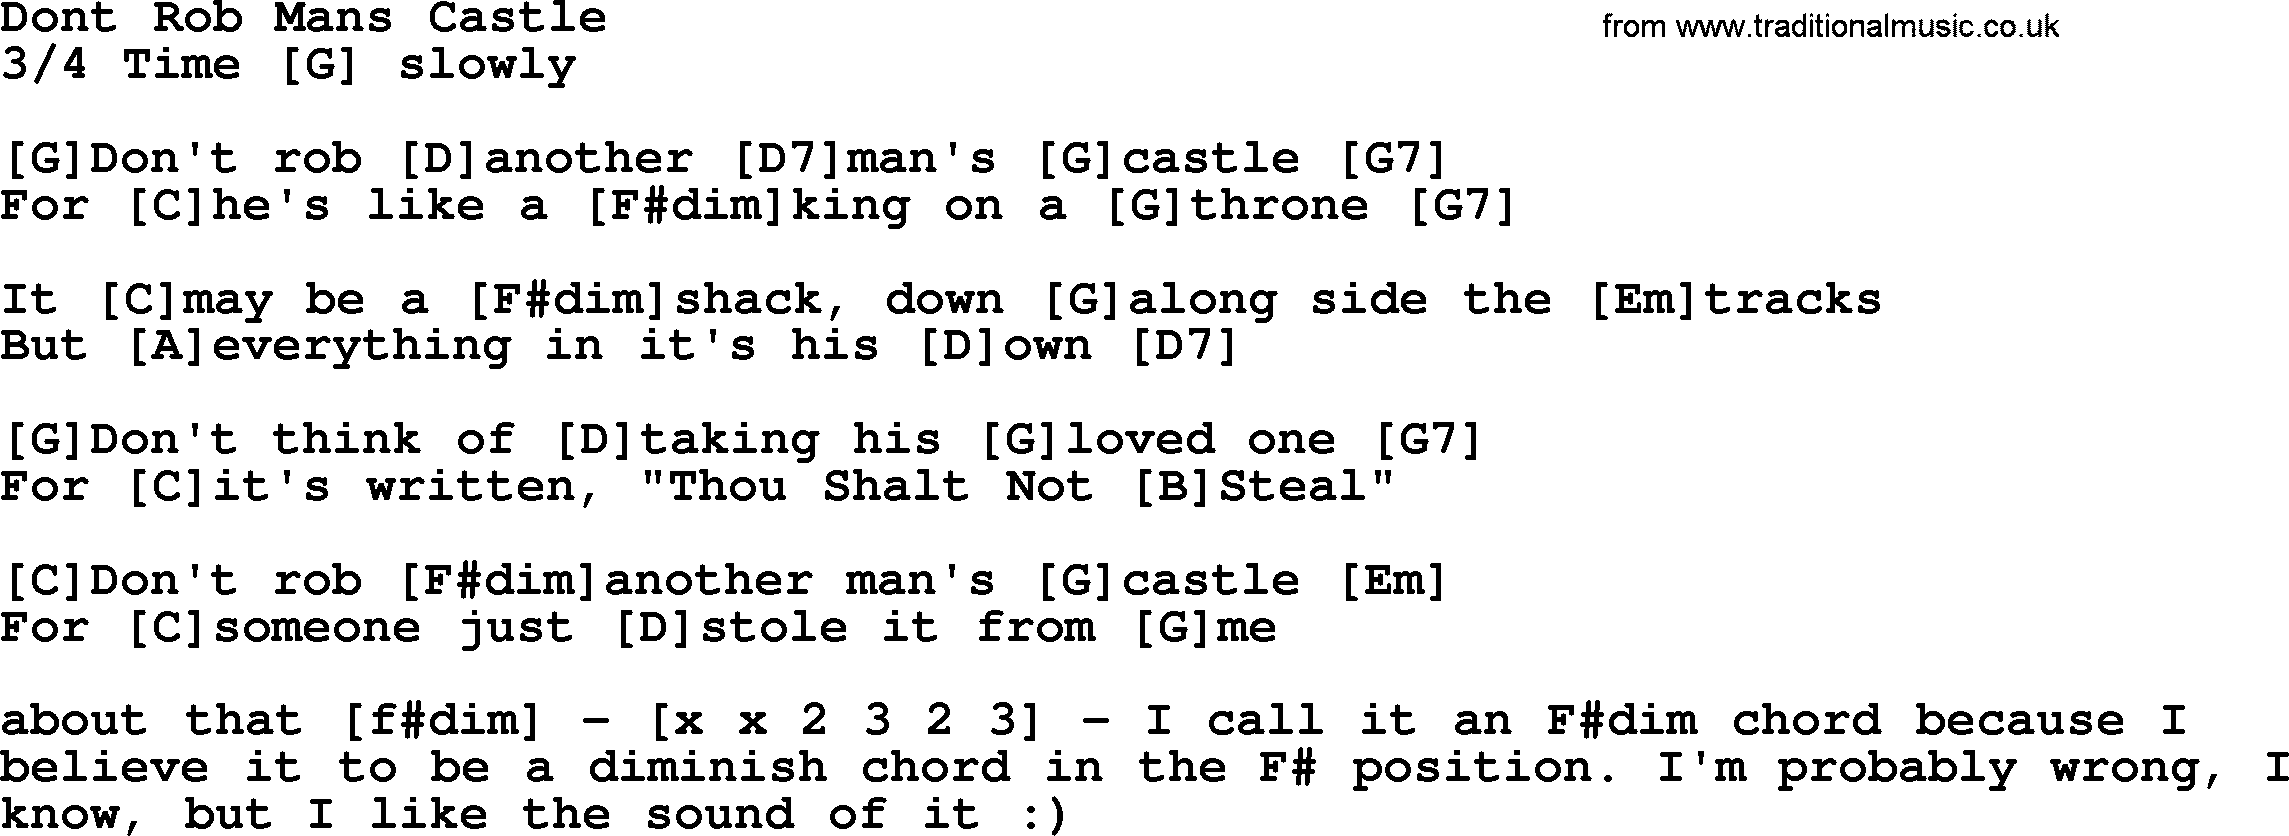 Bluegrass song: Dont Rob Mans Castle, lyrics and chords